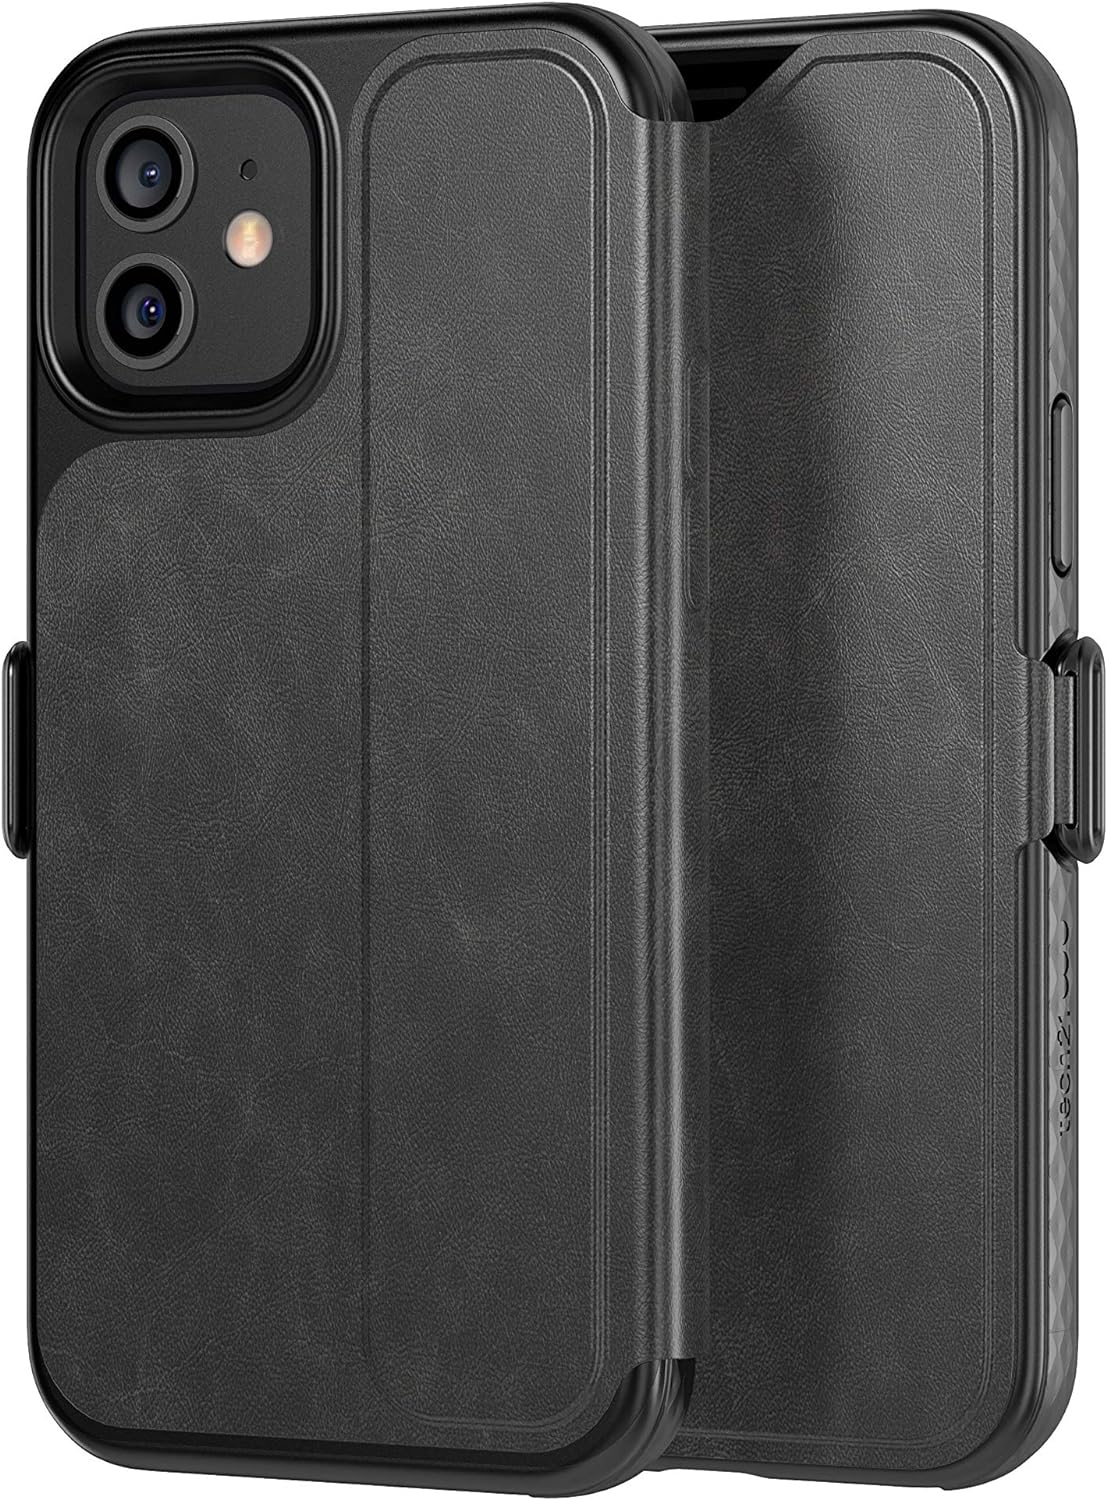 Tech21 Evo Wallet Phone Case for iPhone 12/12 Pro, Black-8731